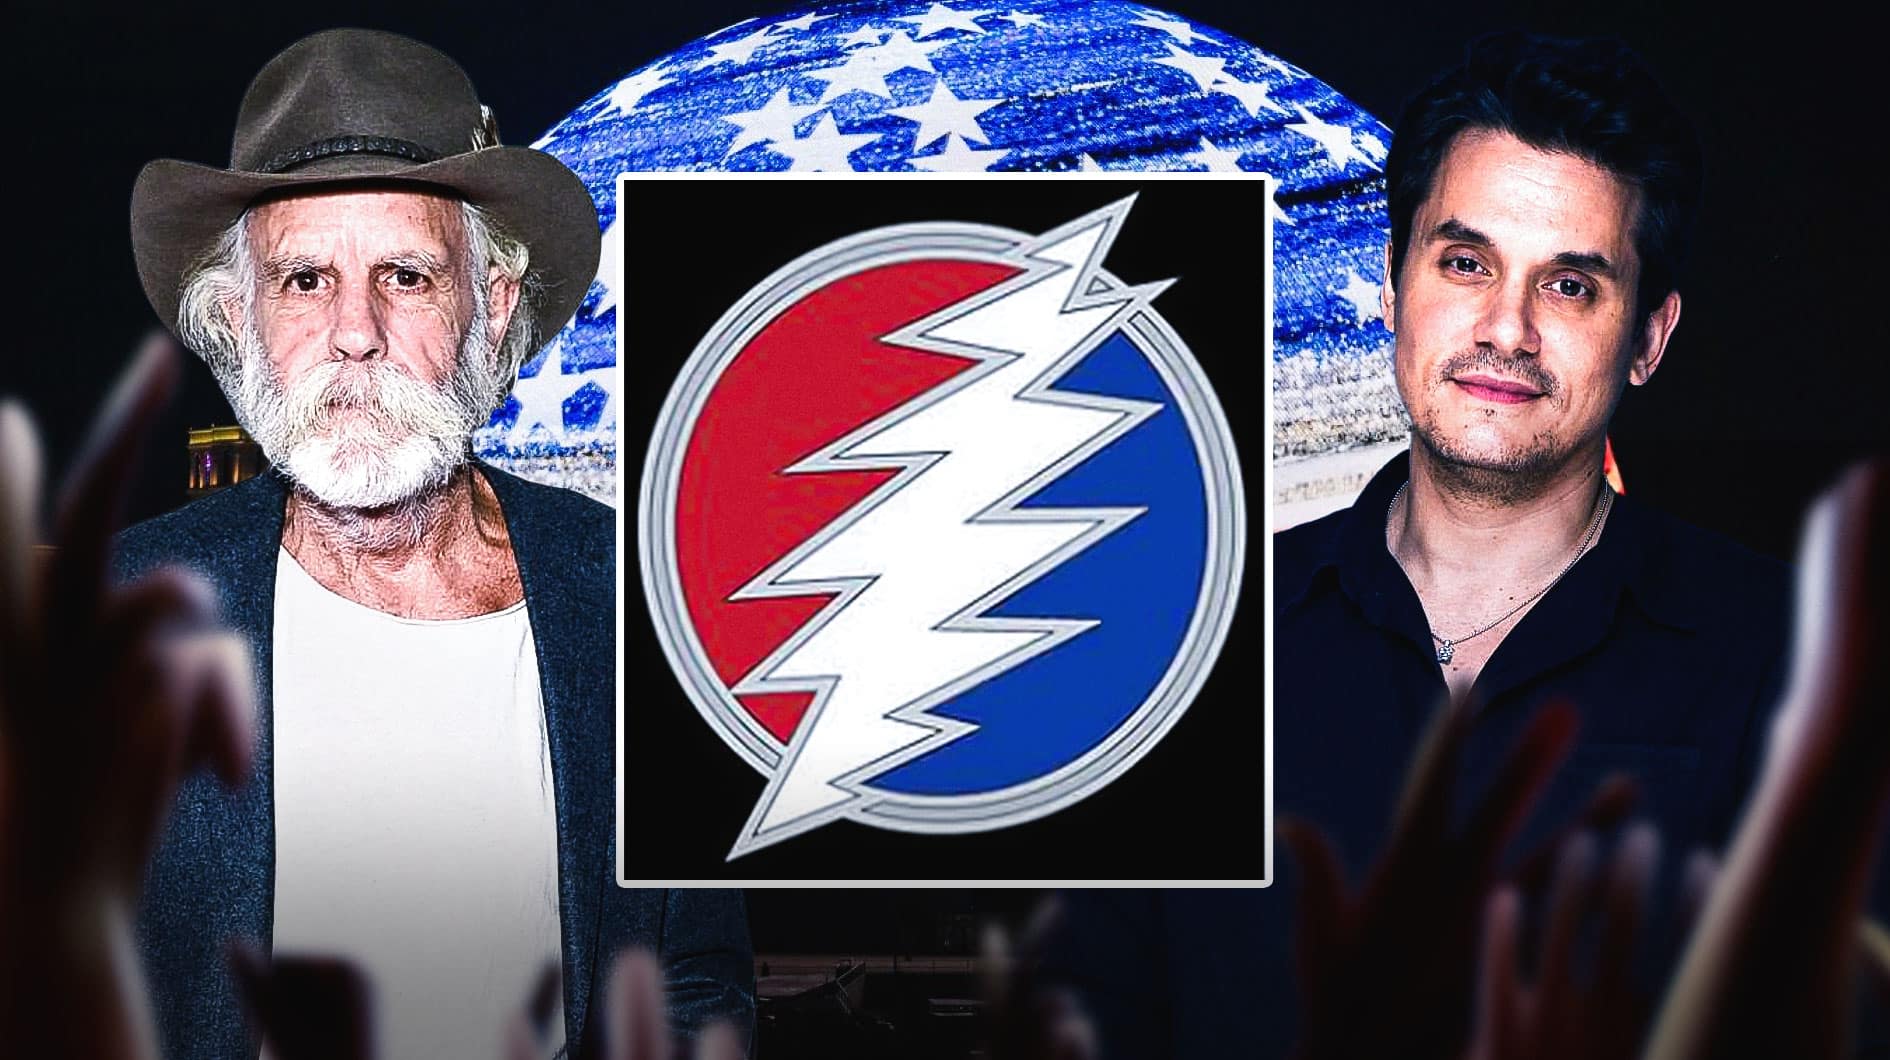 Dead and Company dazzle during Sphere debut